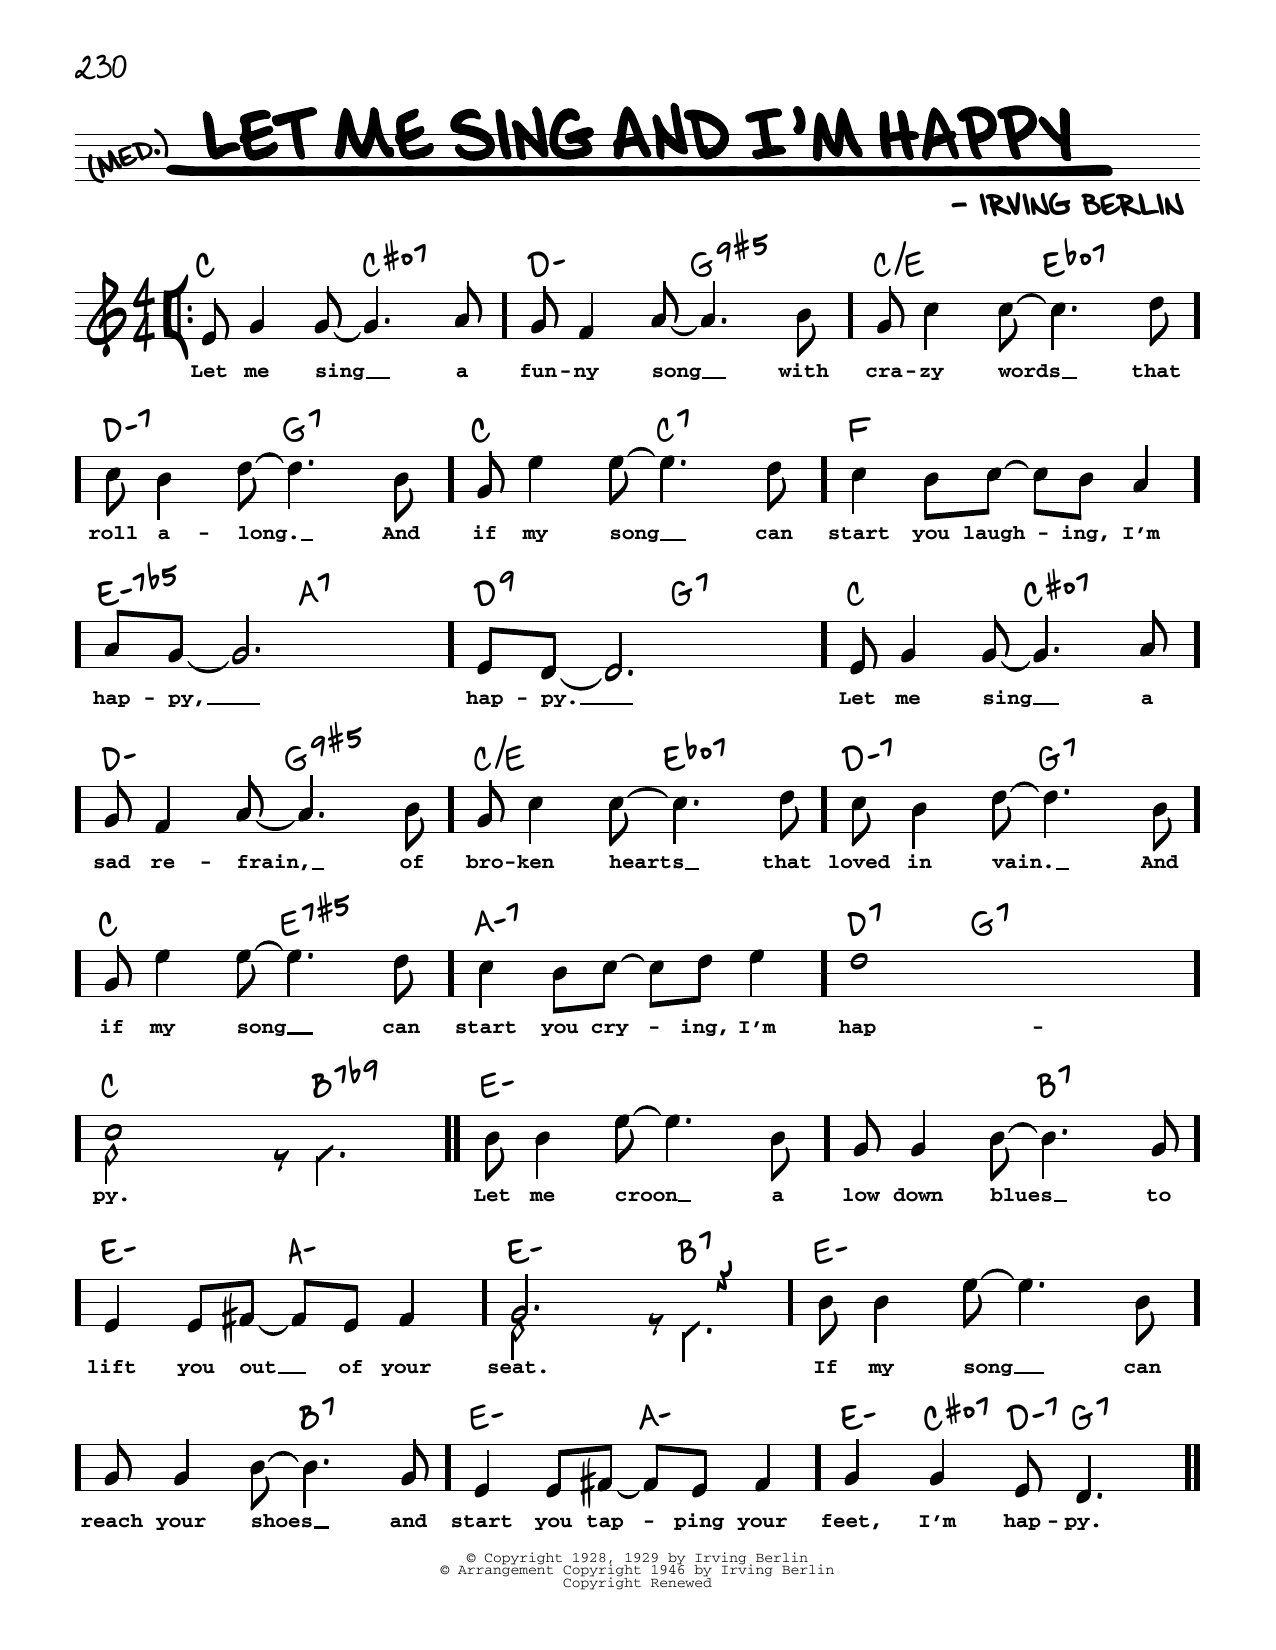 Download Irving Berlin Let Me Sing And I'm Happy (High Voice) Sheet Music